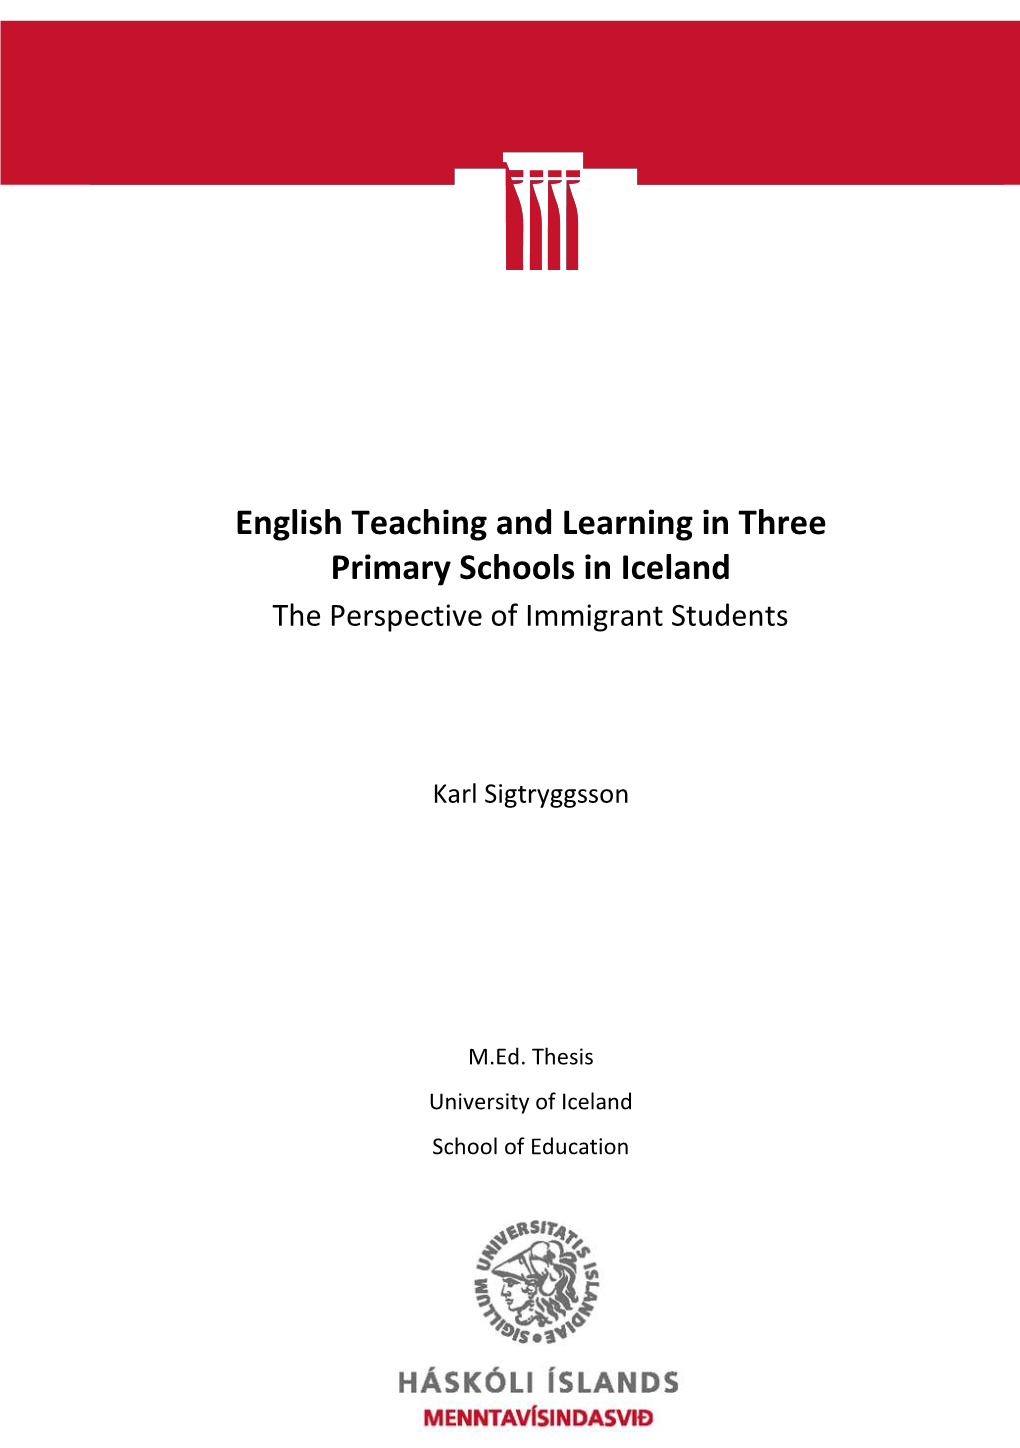 English Teaching and Learning in Three Primary Schools in Iceland the Perspective of Immigrant Students